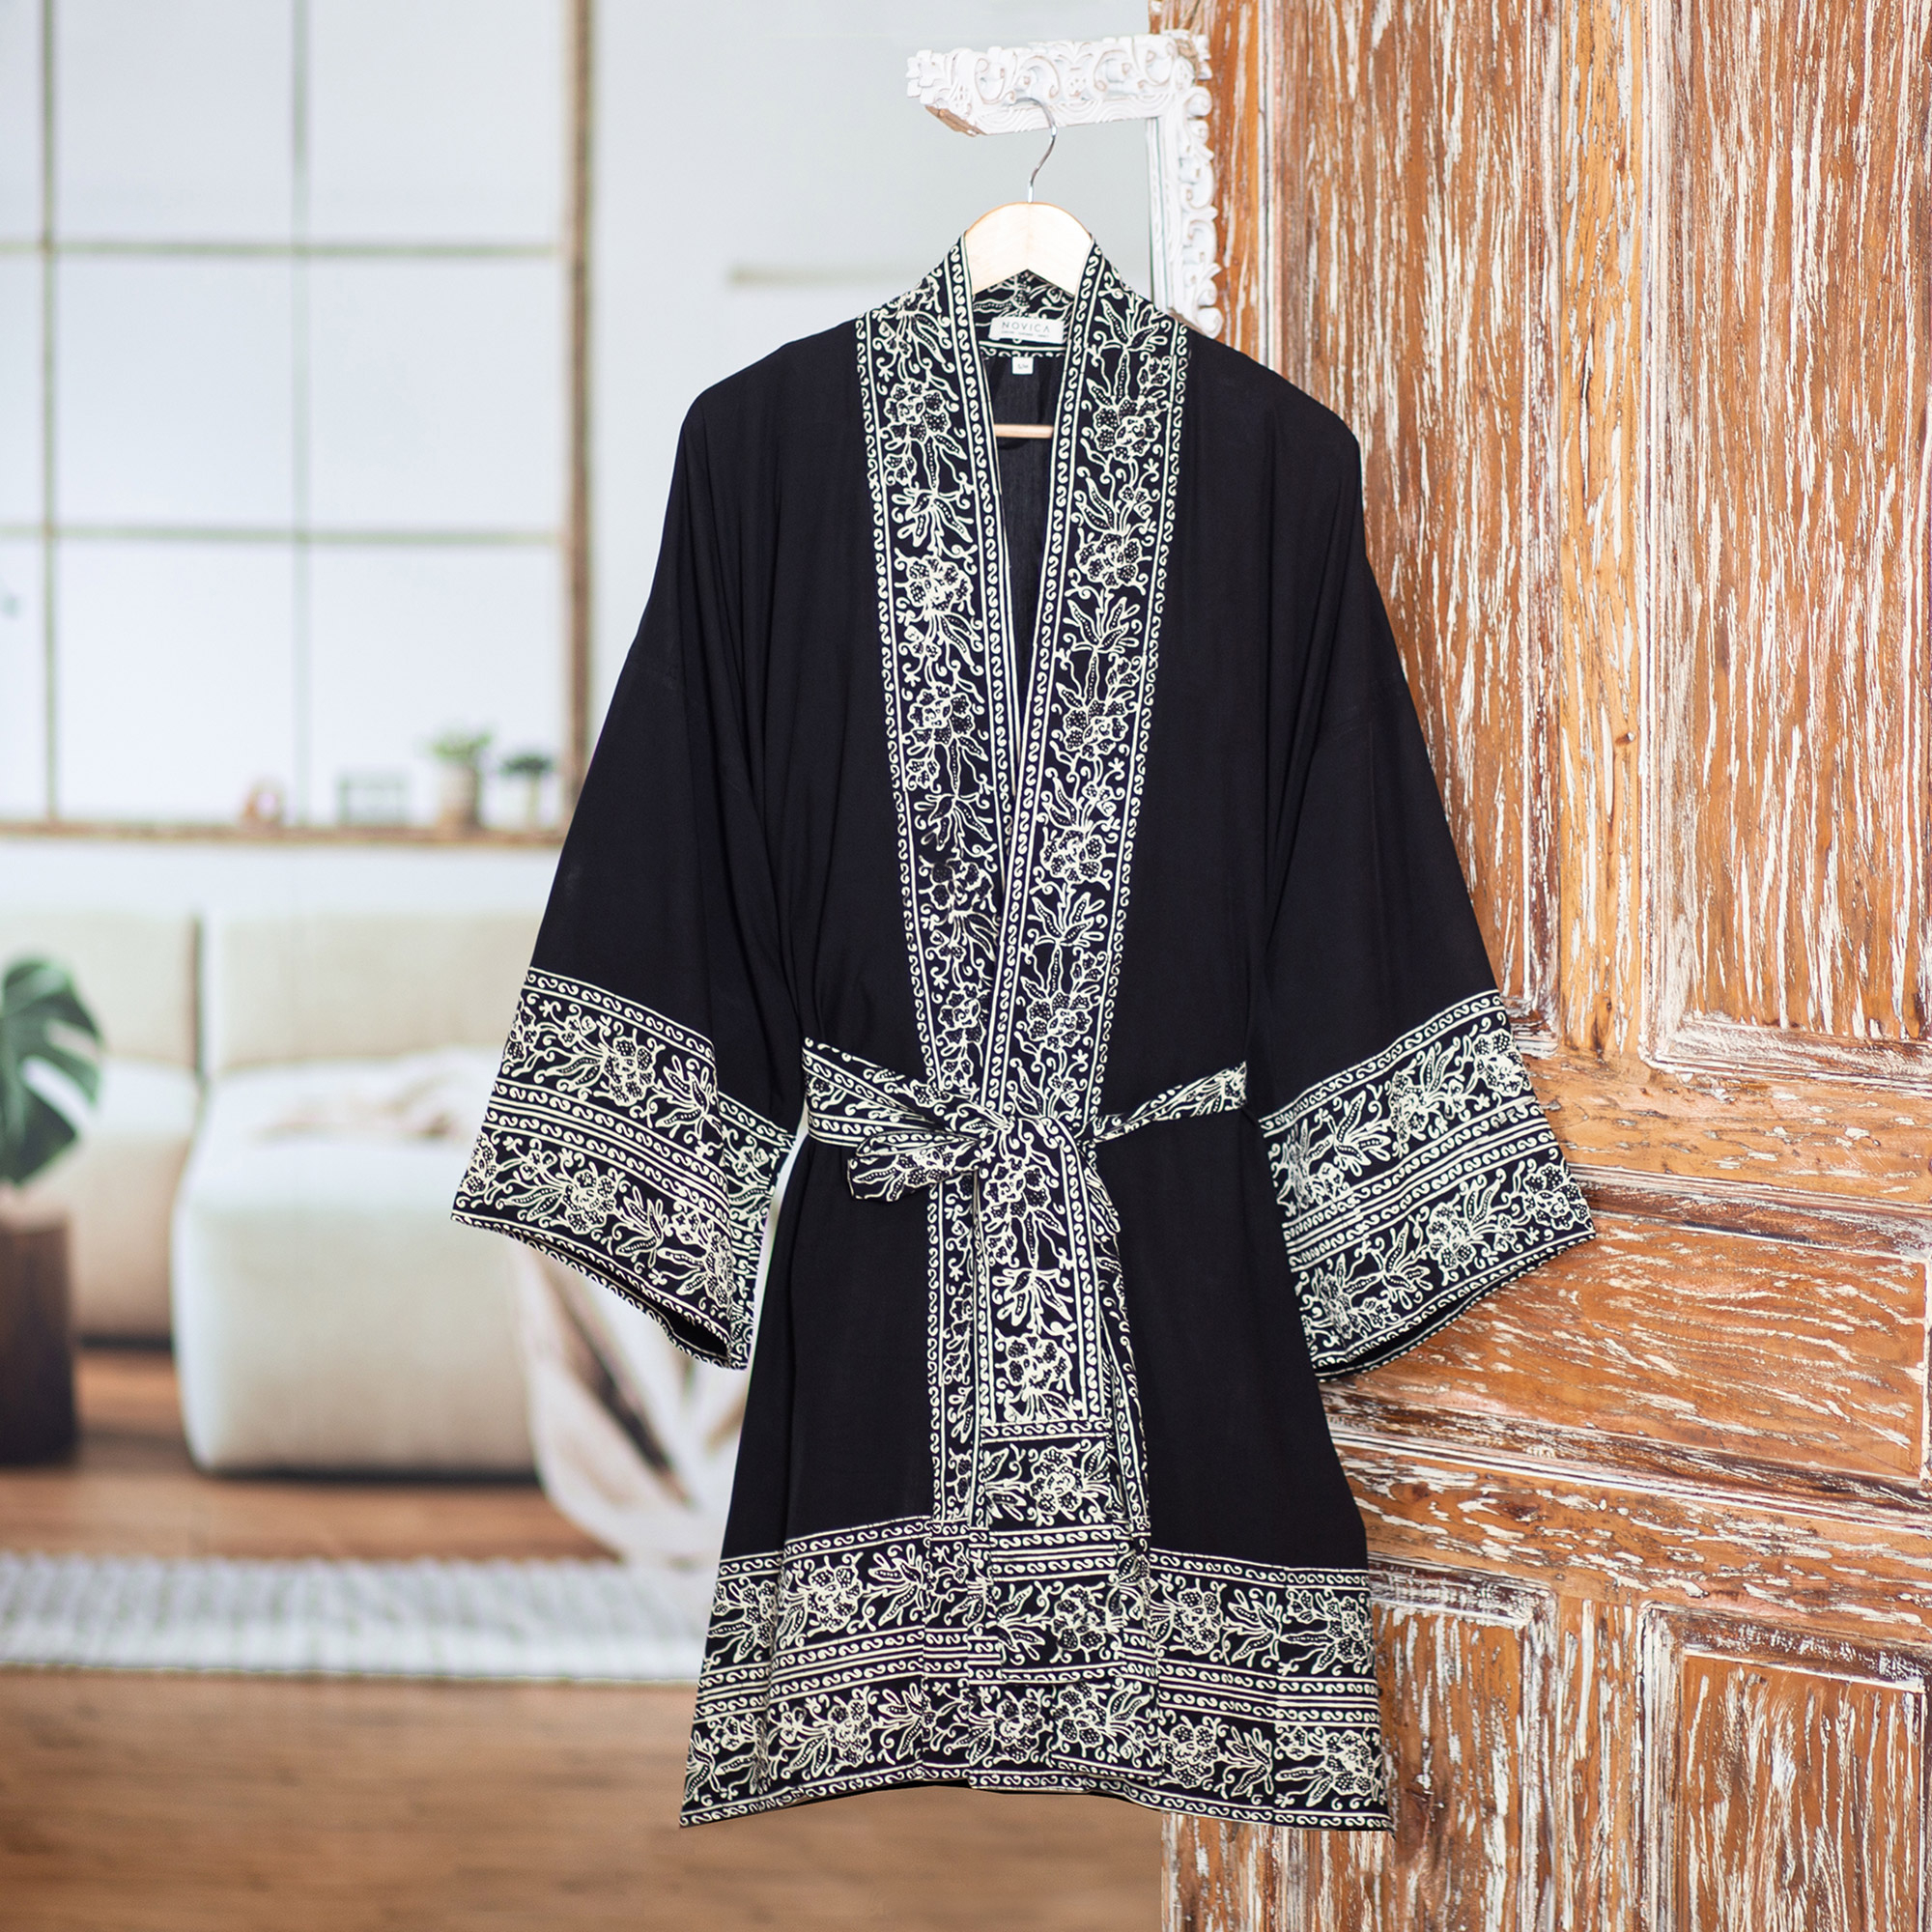 Indonesian Floral Patterned Black and White Short Robe - Midnight Rose ...